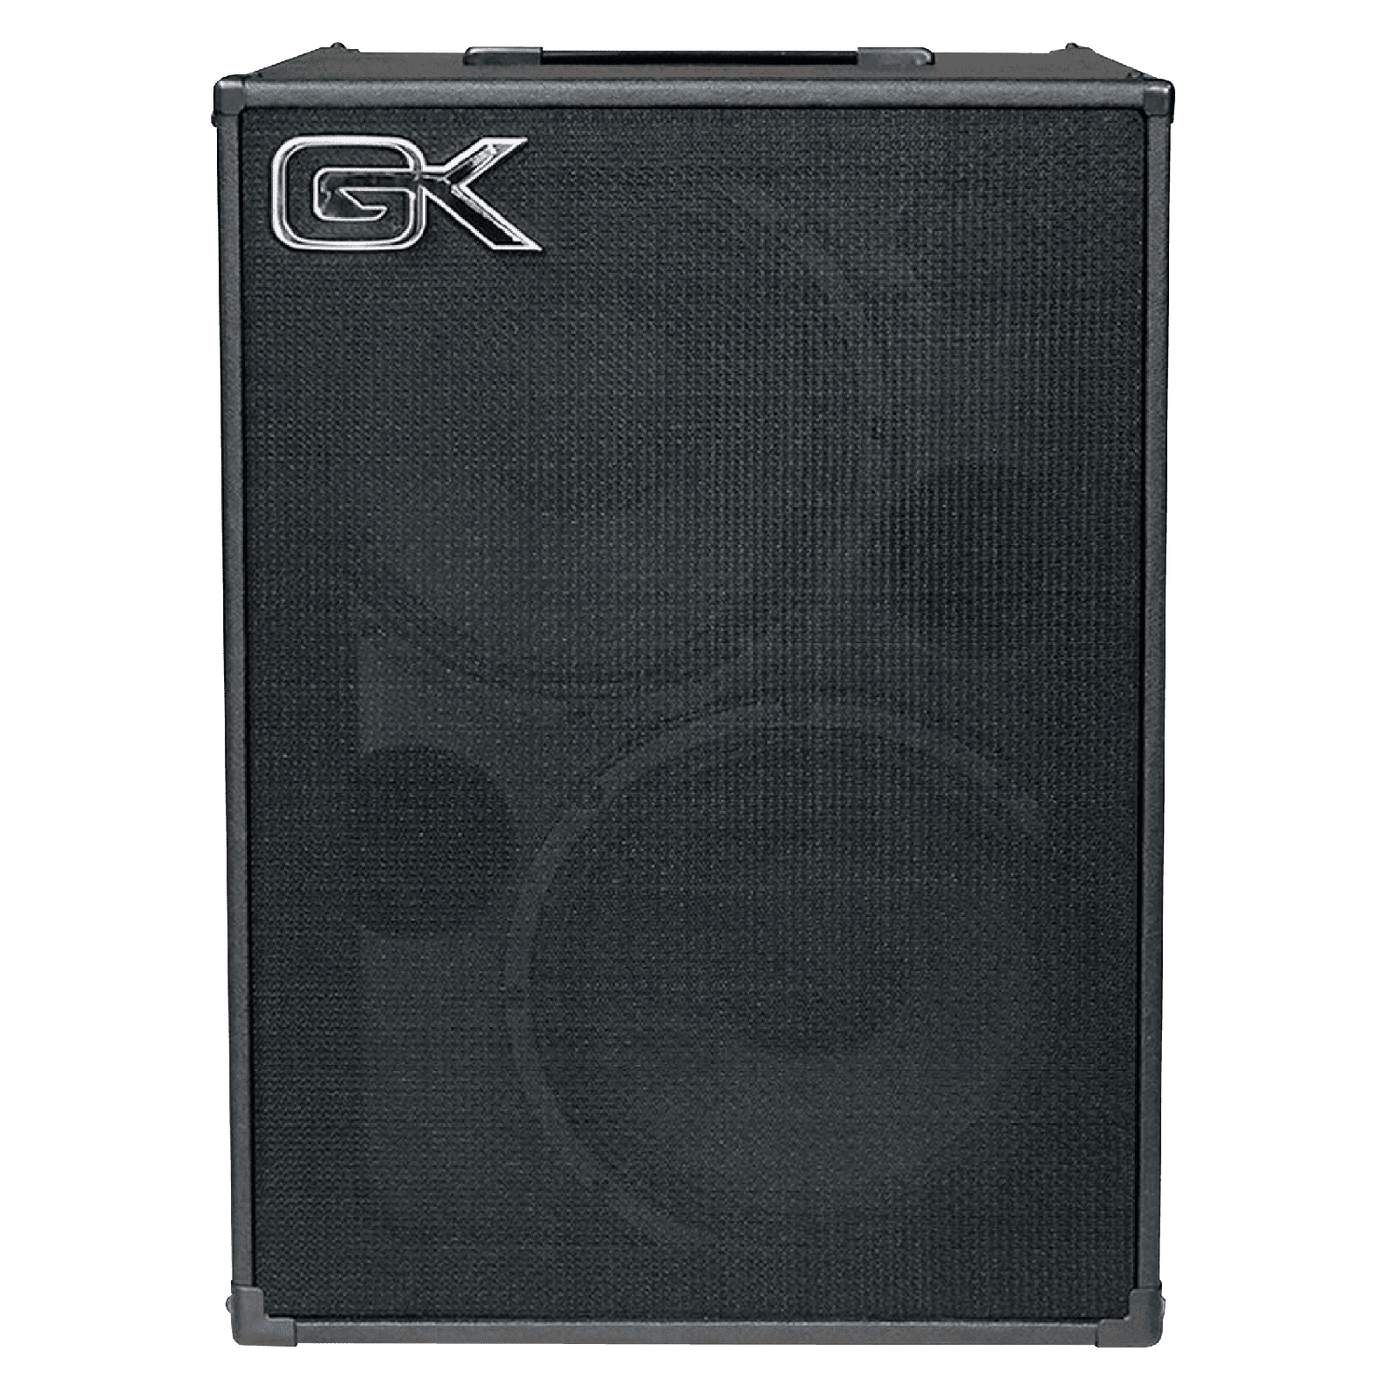 Gallien-Krueger MB 212-II - The Gallien-Krueger MB212-II is your ideal grab 'n' go bass combo amp. G-K's MB II Series combos sport ultra-efficient digital power plants, making them unbelievably lightweight. Another cool innovation is G-K's Chain Out, whic